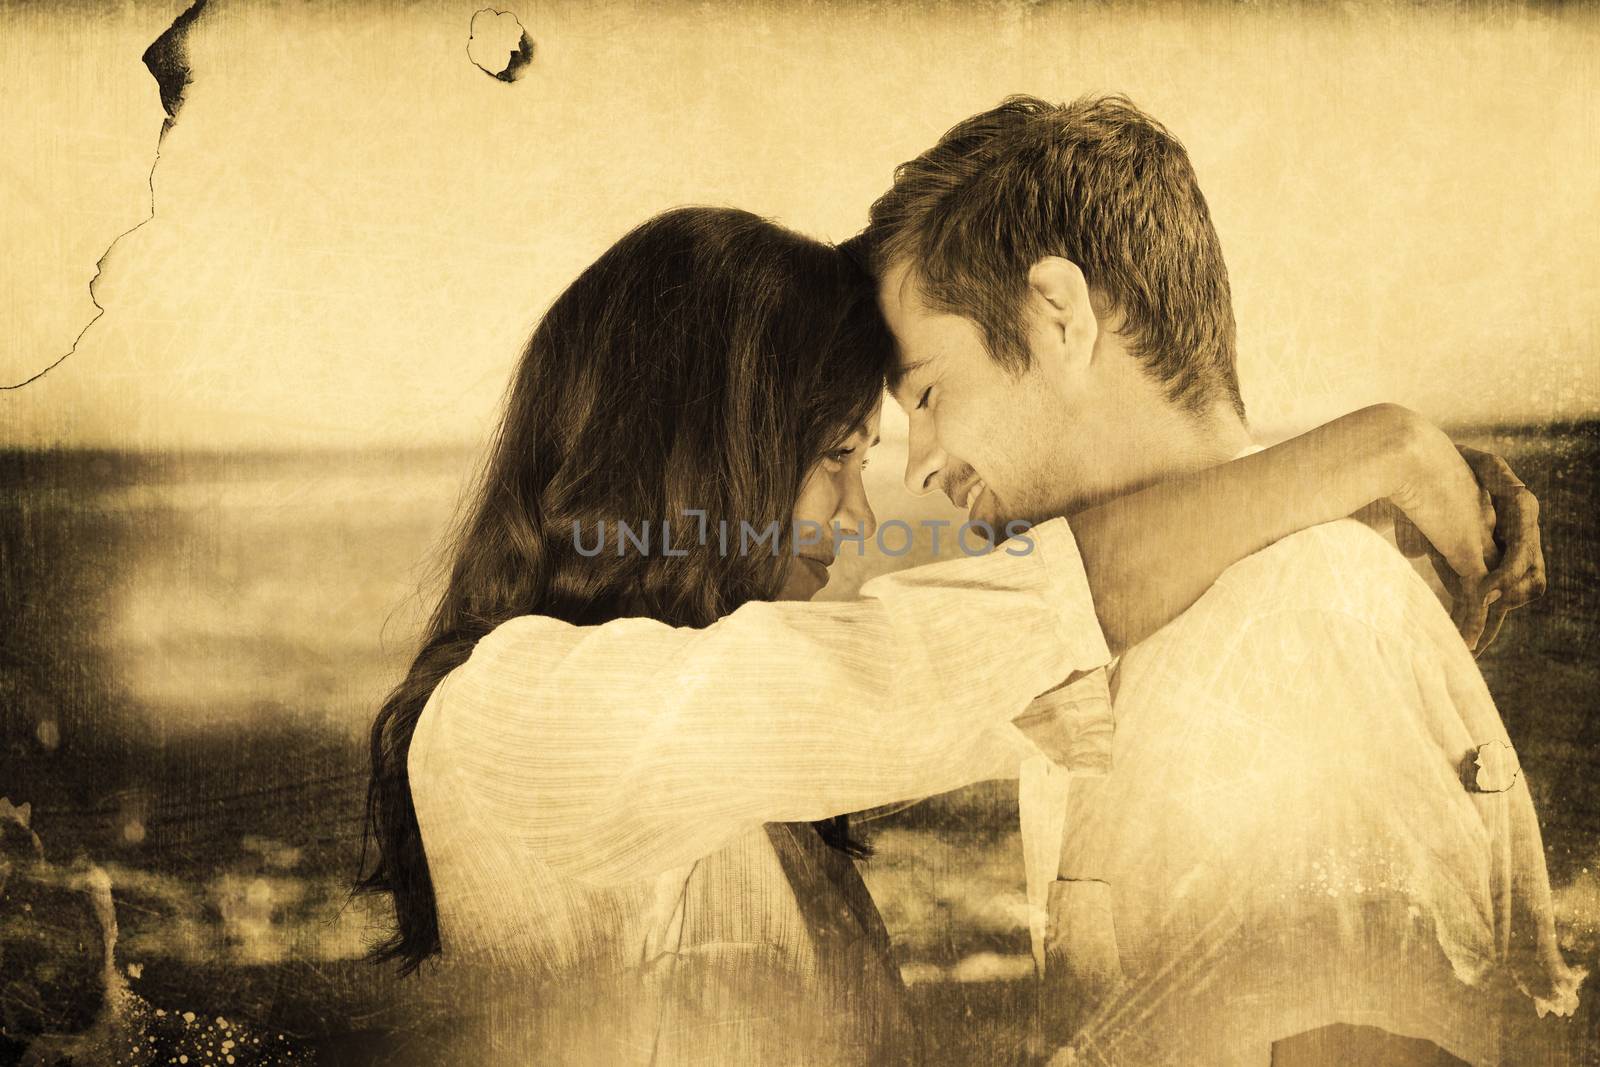 Couple embracing each other on the beach against grey background